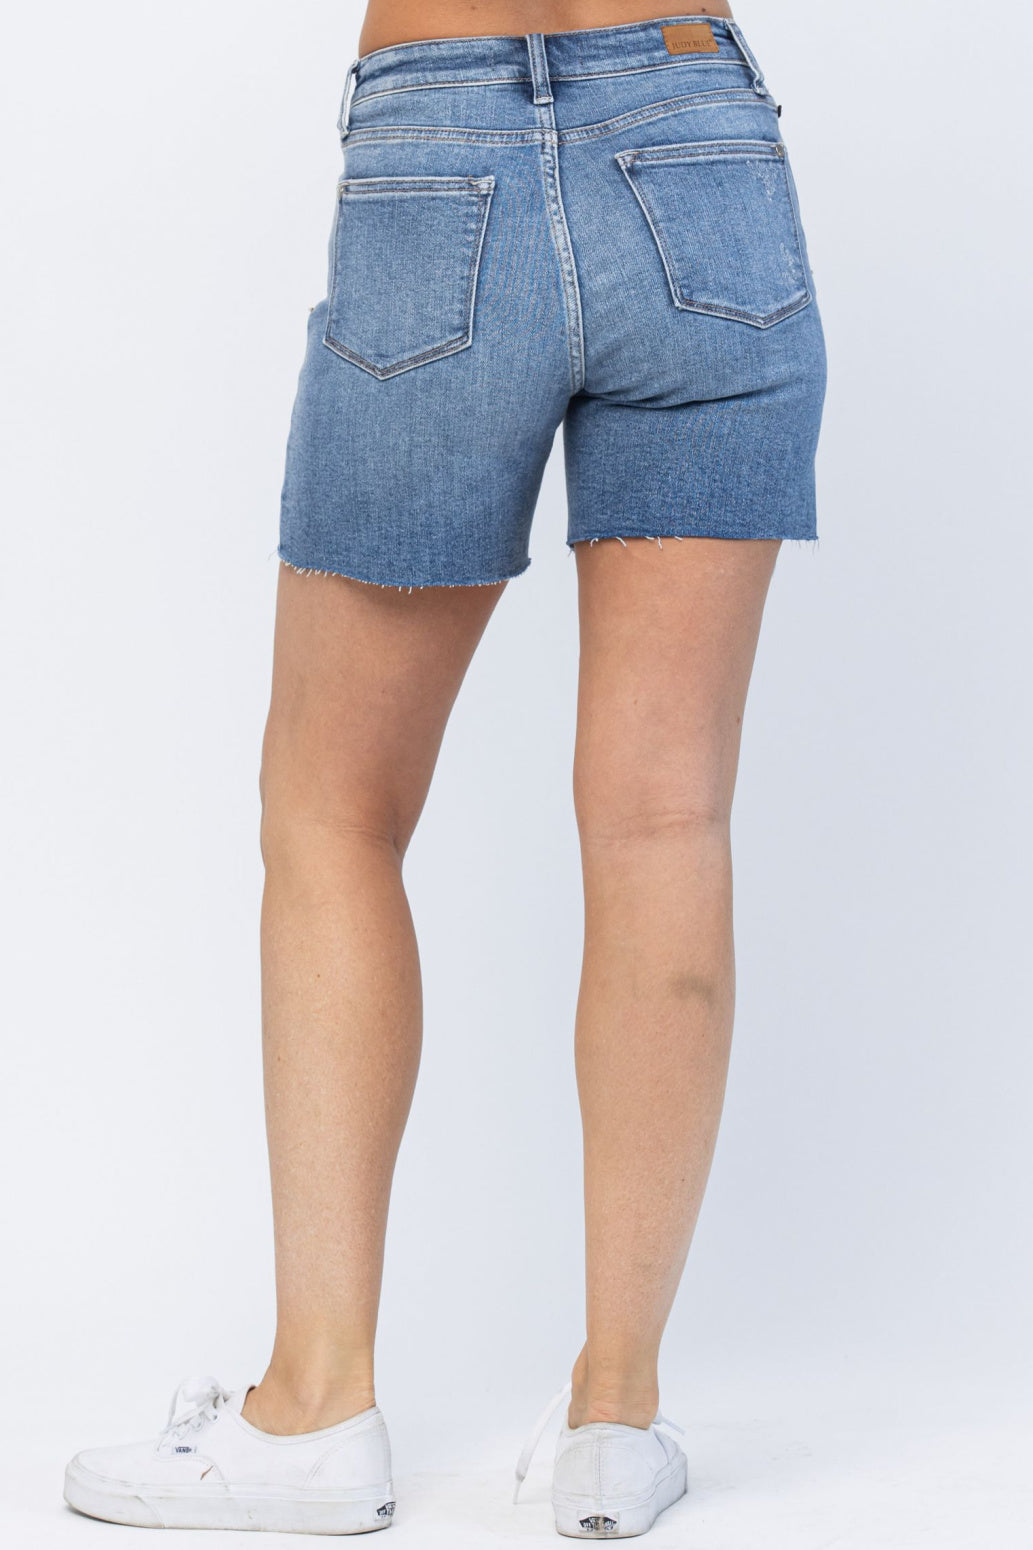 Judy Blue Embroidered Pocket High Waist Cut Off Shorts Style 15102